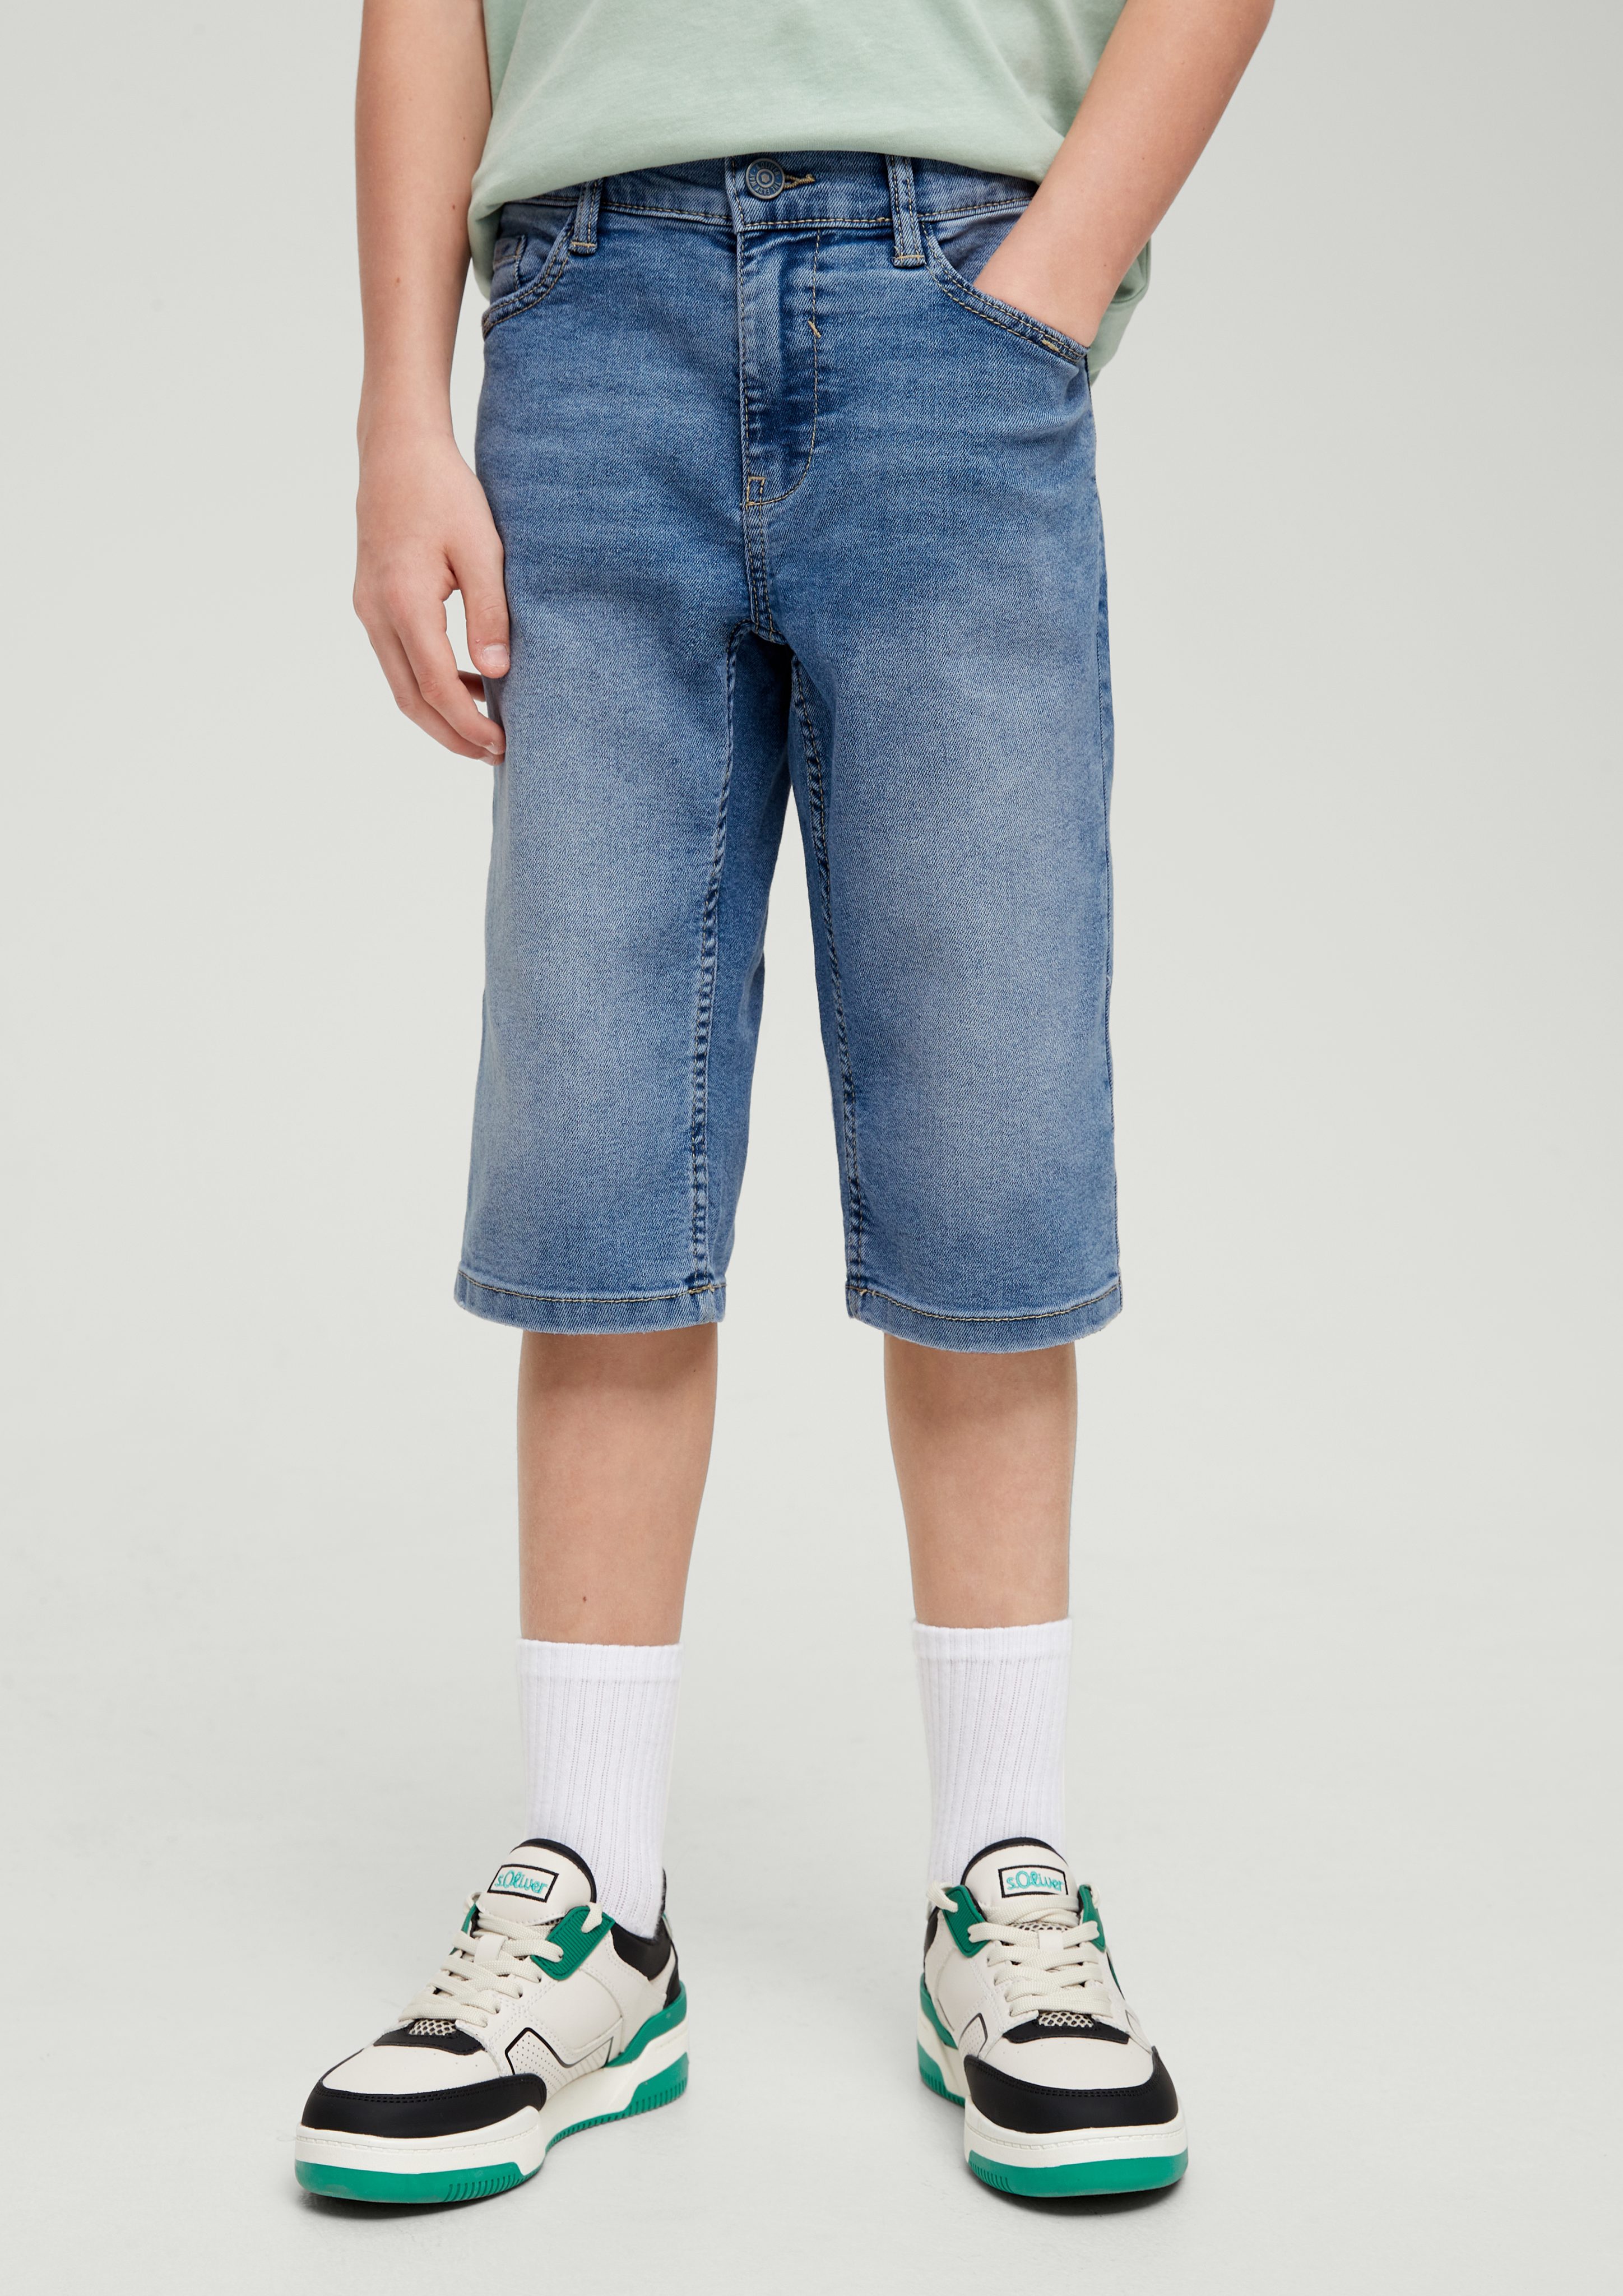 s.Oliver 7/8-Jeans Seattle: Waschung Jeans Waschung mit